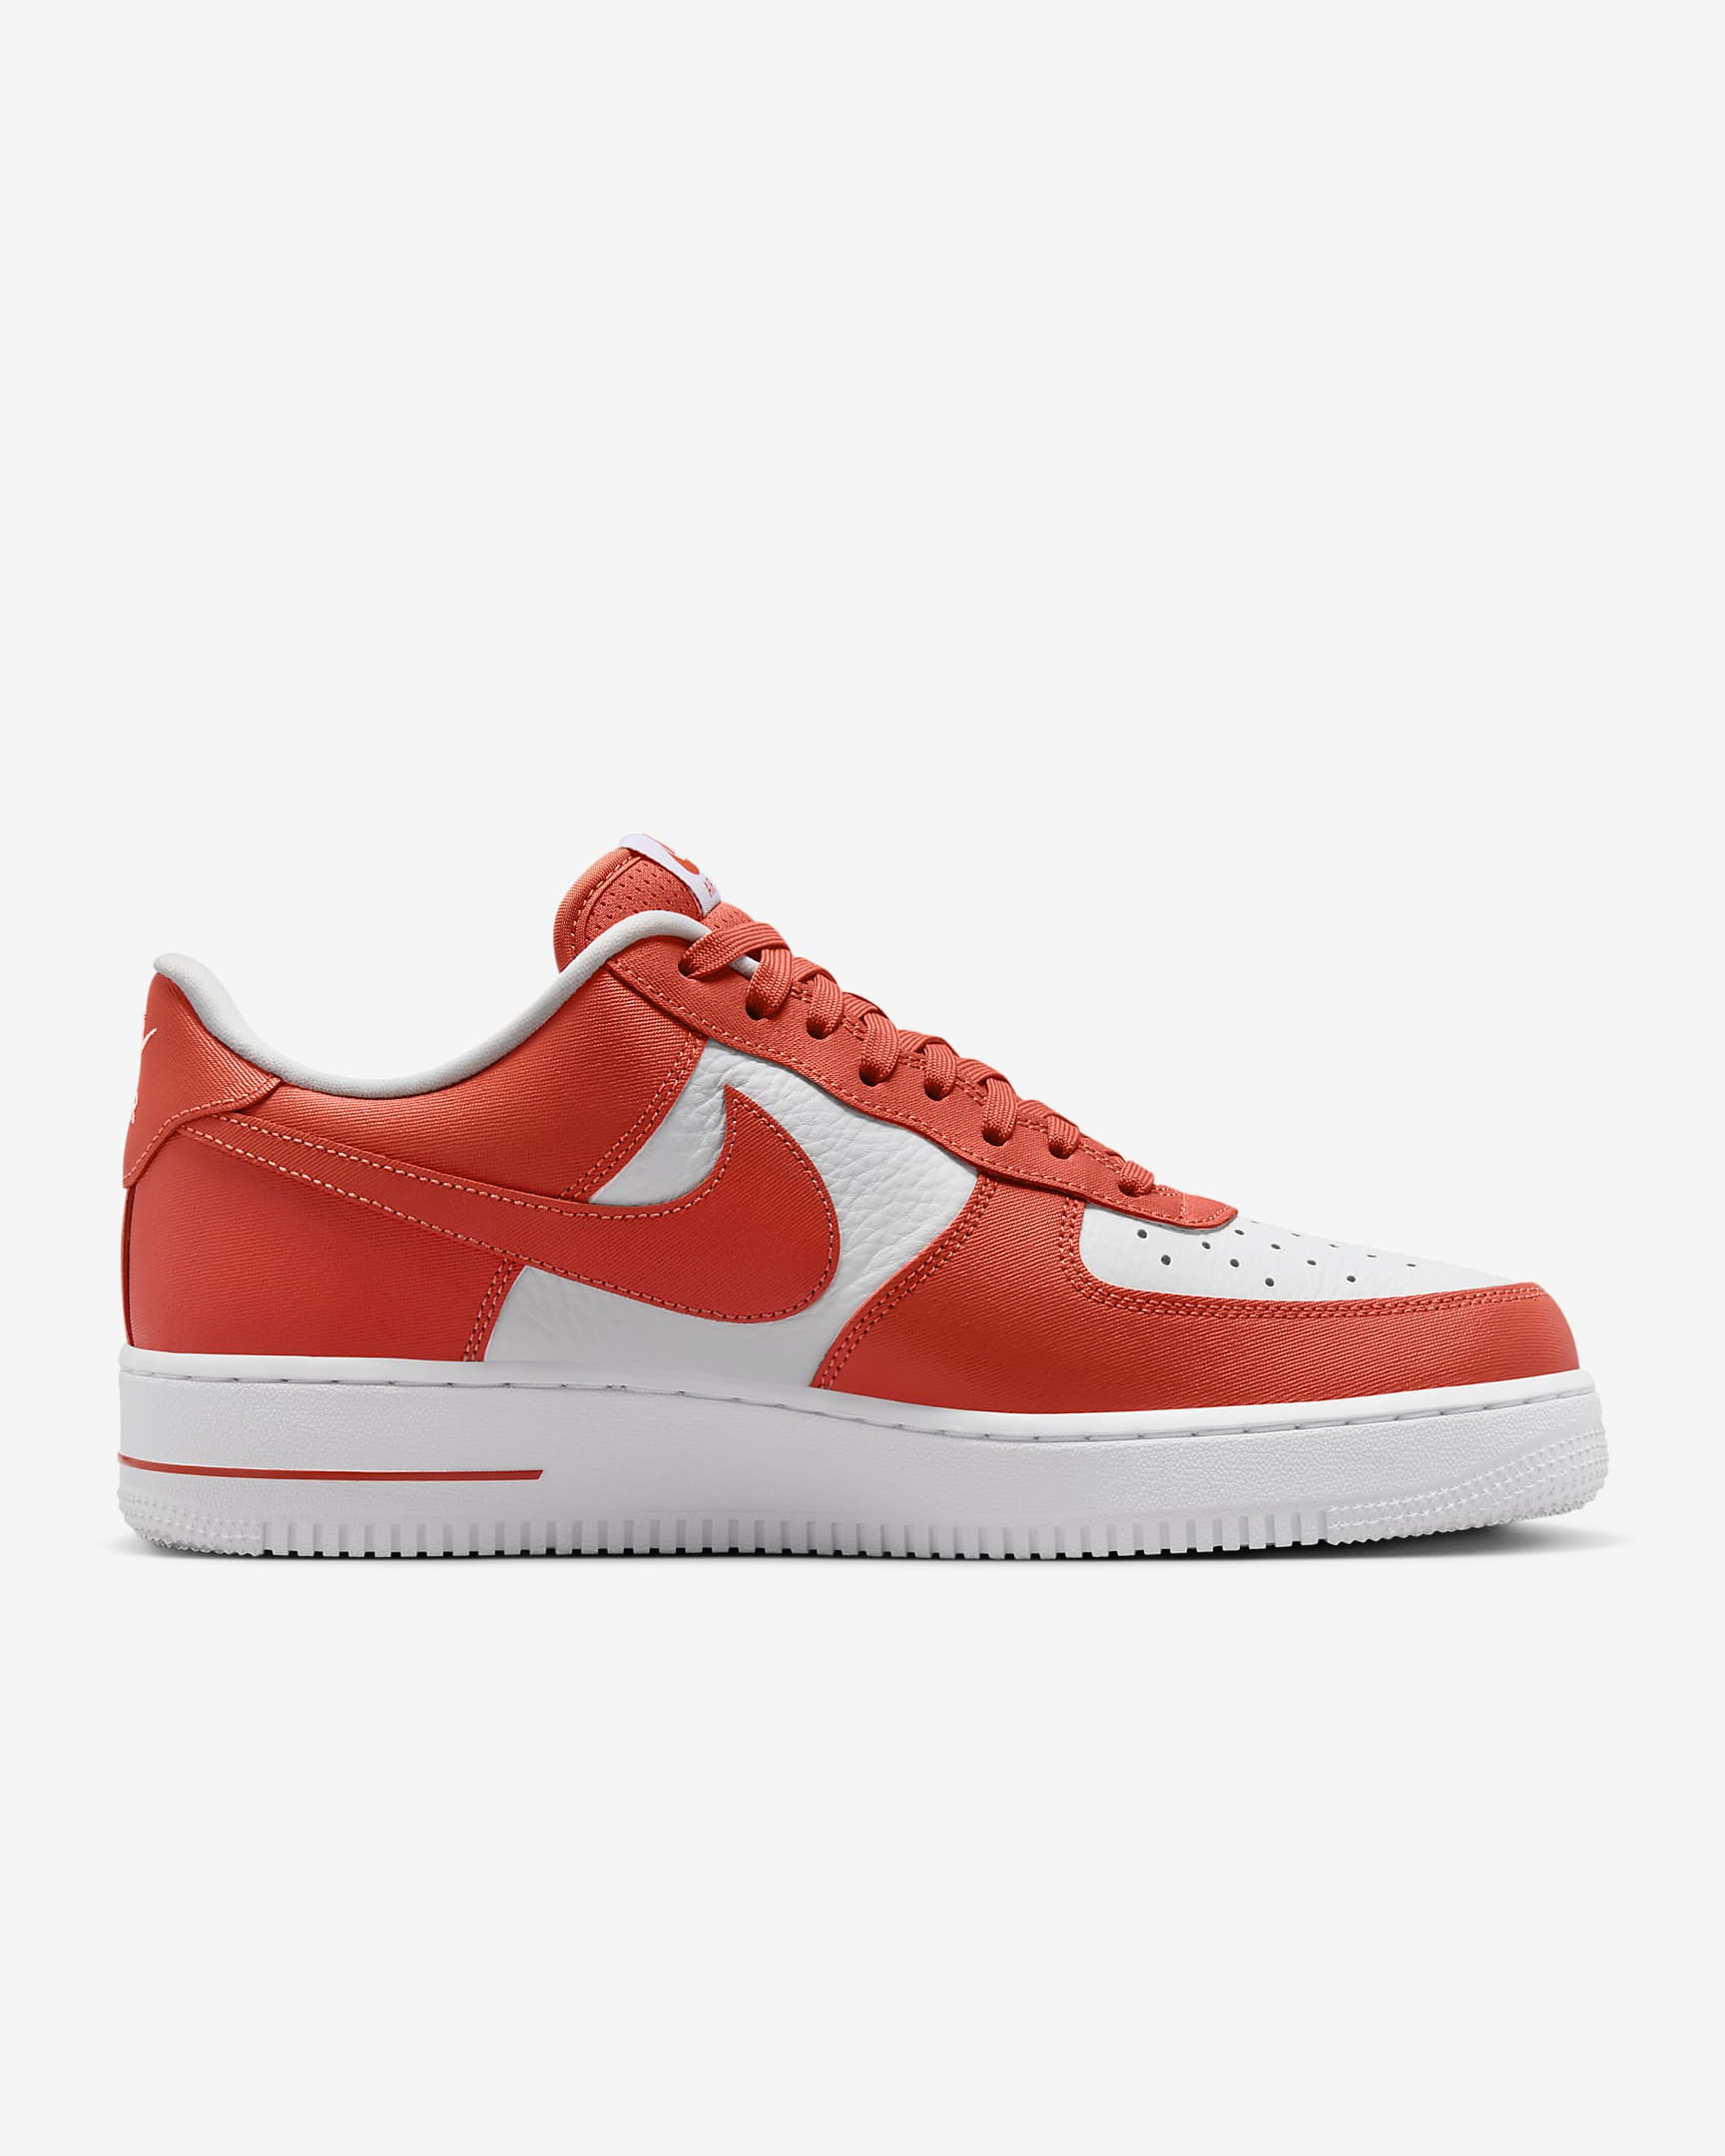 Nike Air Force 1 '07 Men's Shoes - Cosmic Clay/White